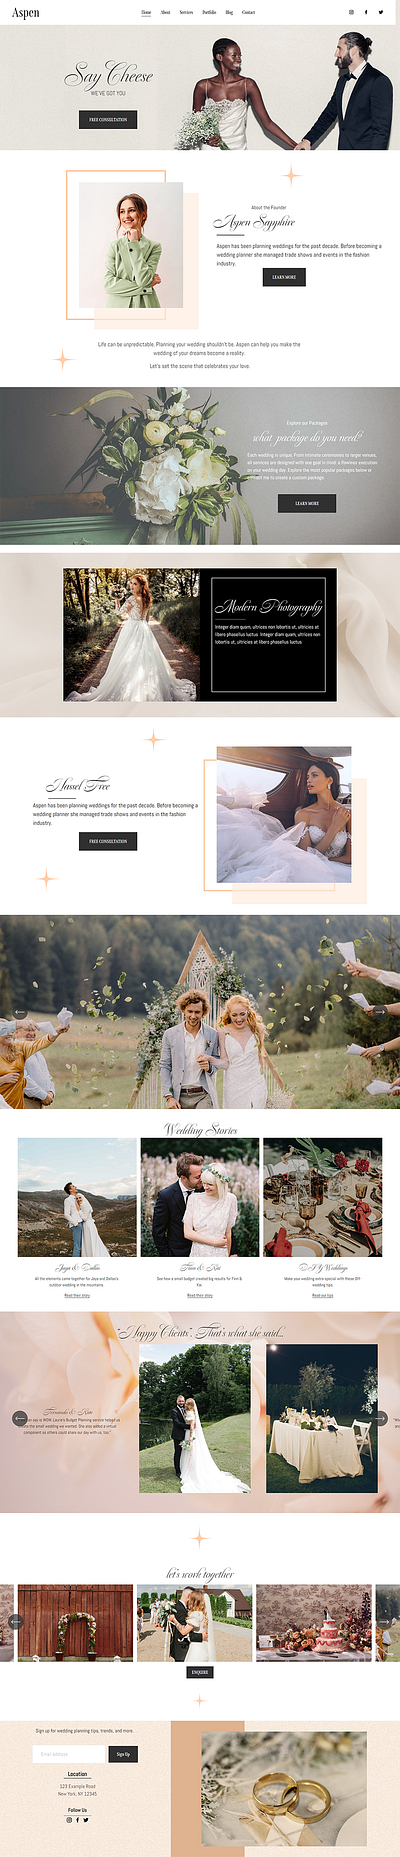 Squarespace Wedding Website Template for Photographers